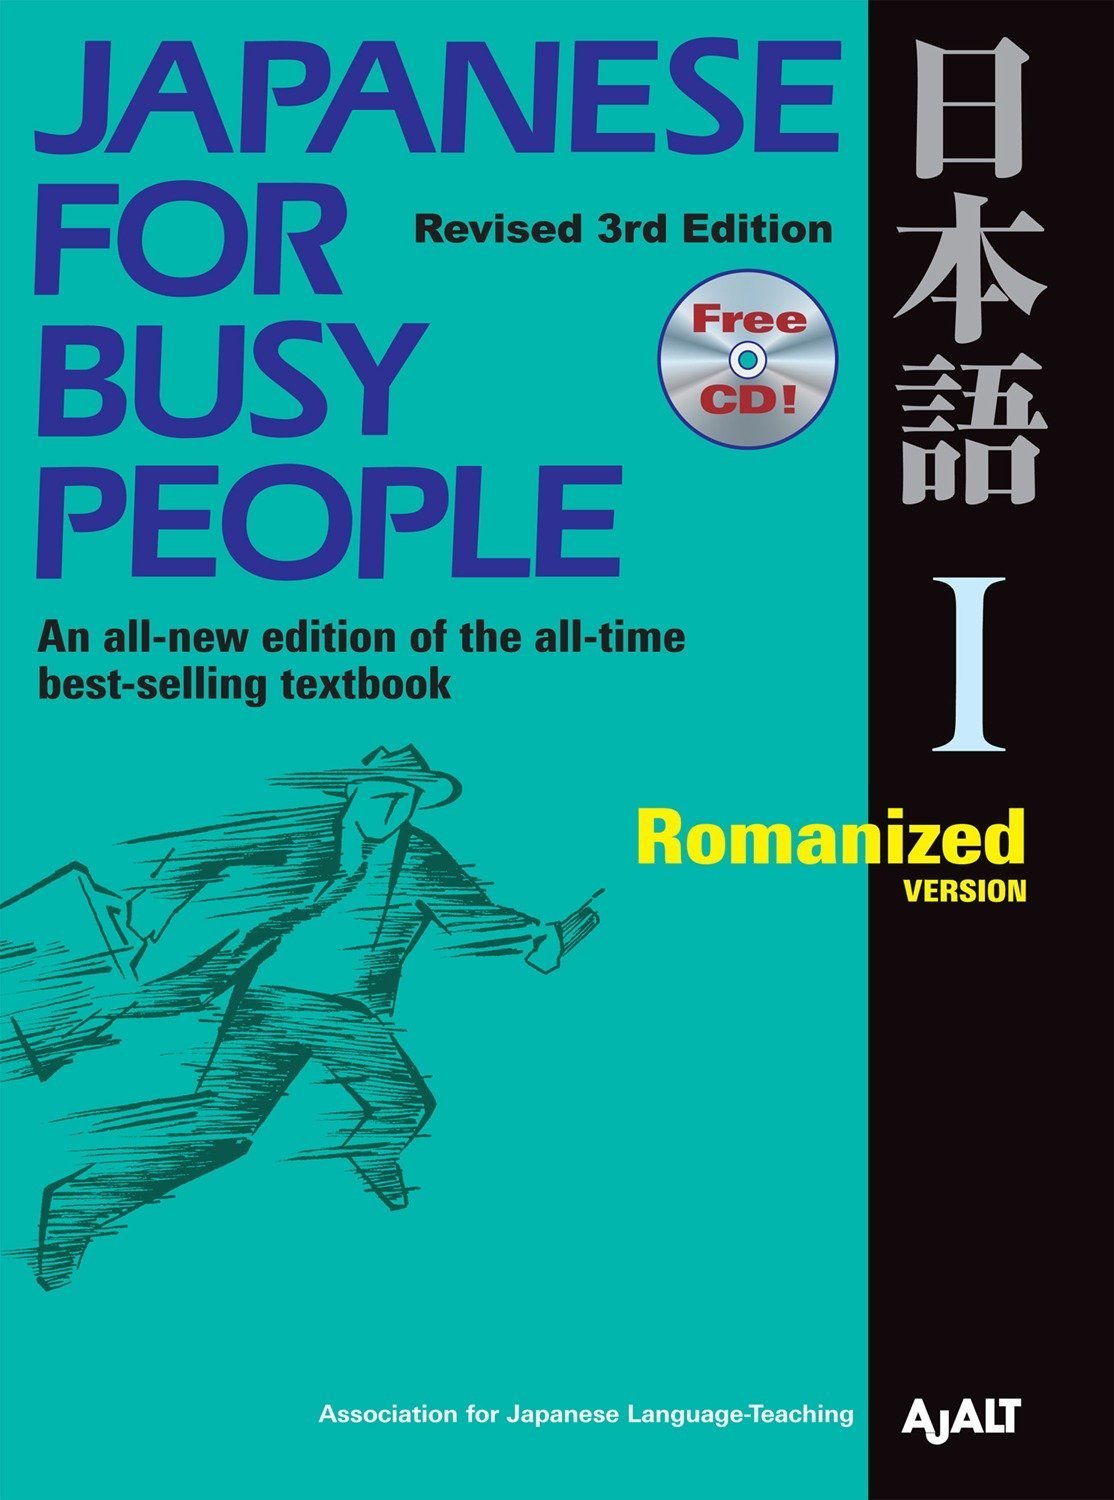 I　Busy　Japanese　of　—　Houston　Japan-America　for　People　Textbook　Romanized　Society